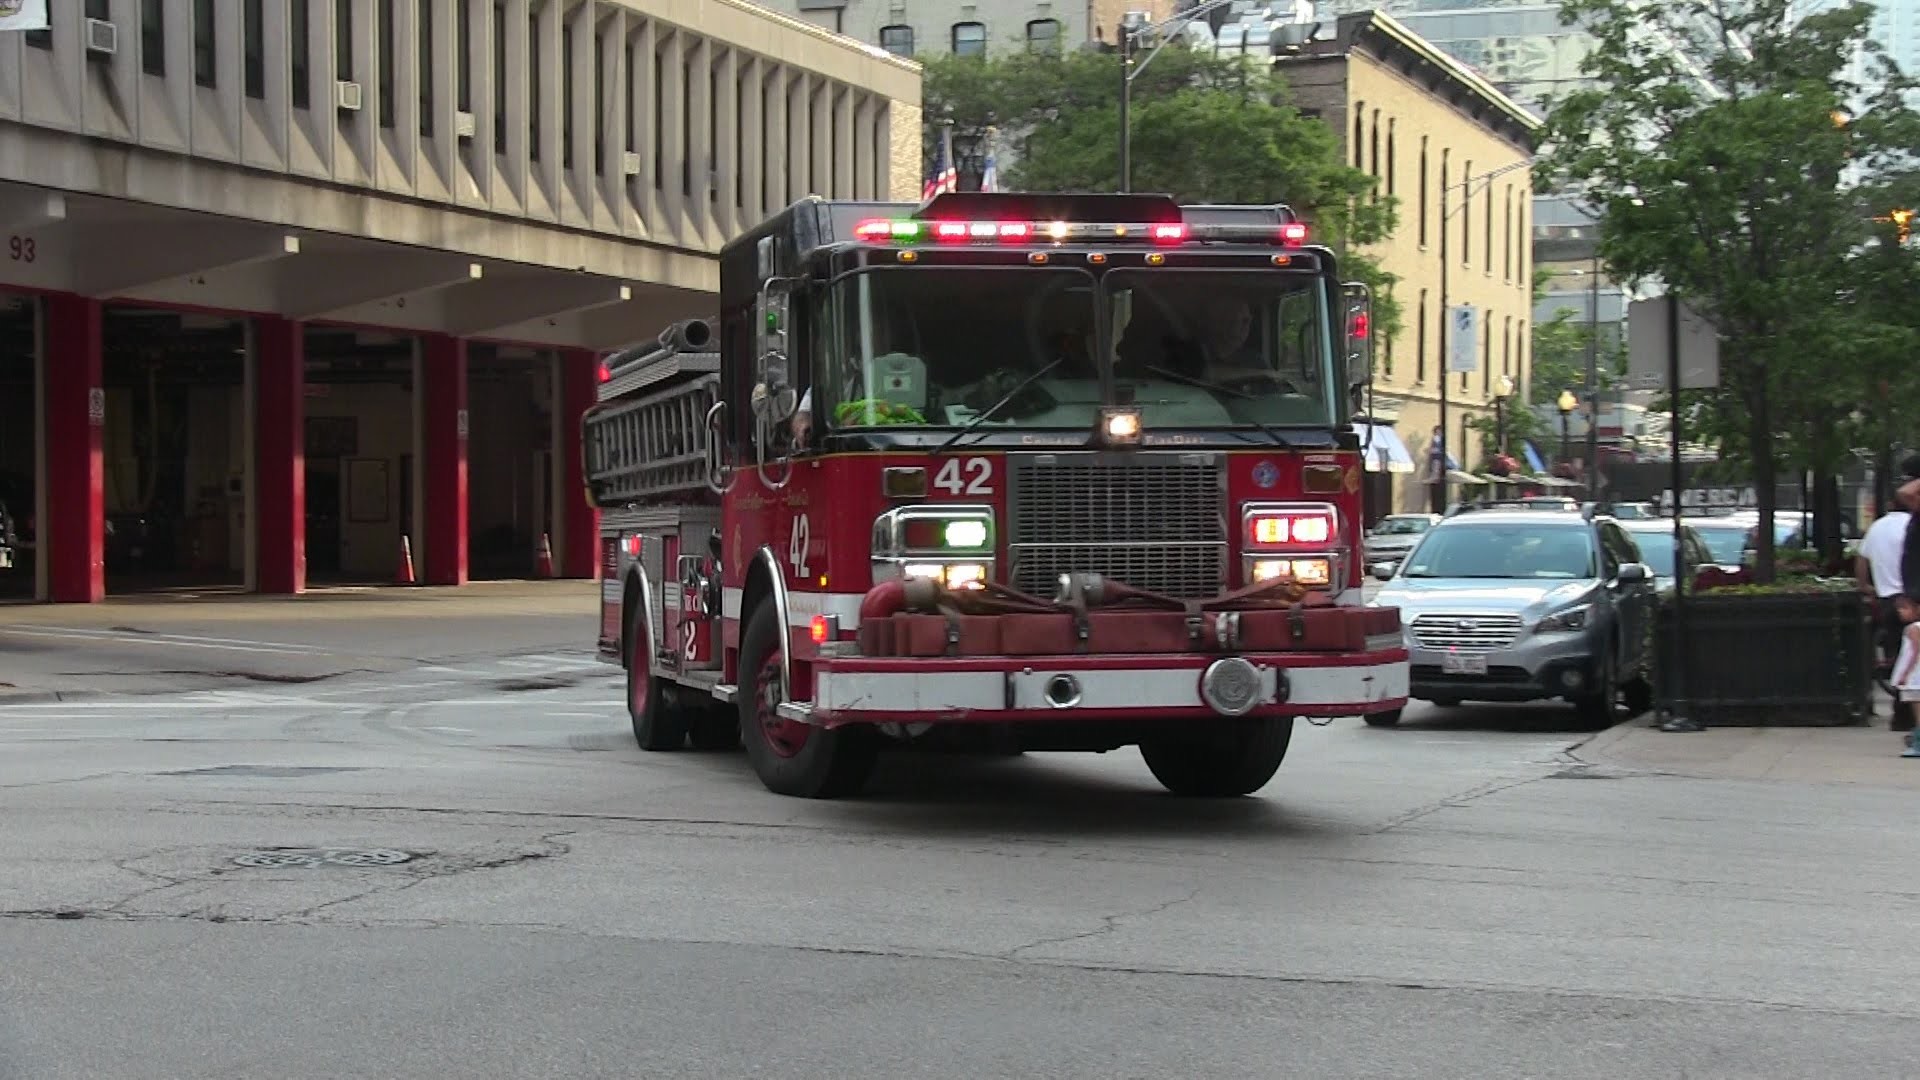 1920x1080 Ambulance 42 + Engine 42 responding - Chicago Fire Department - YouTube